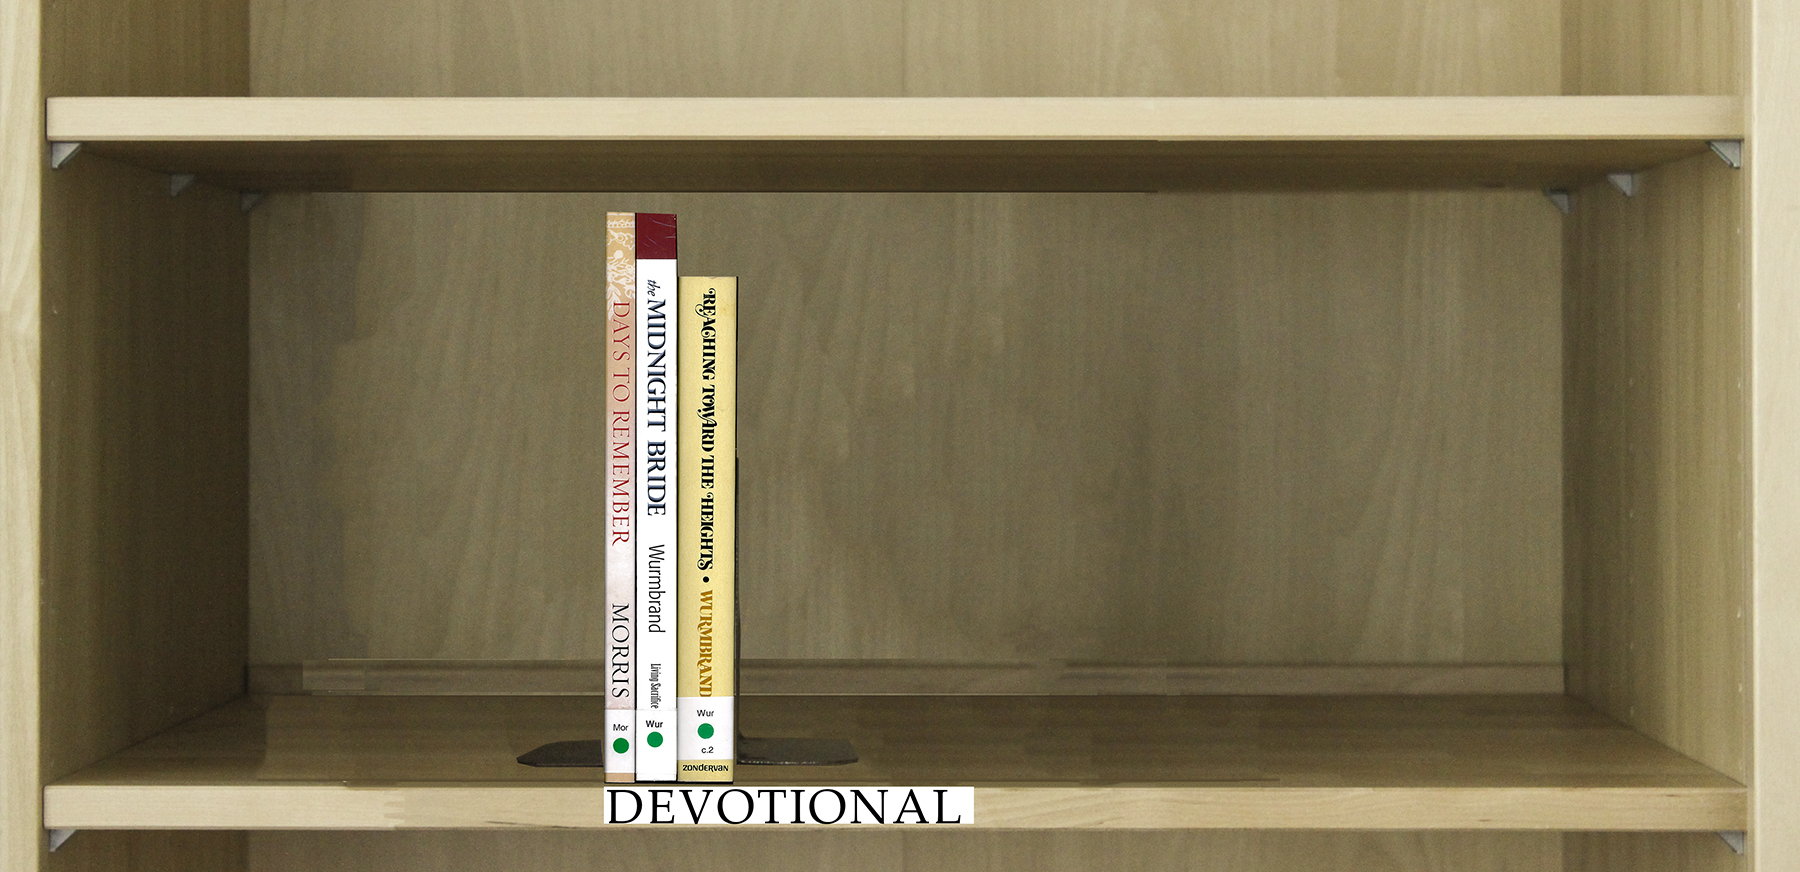 Index of Books Under the Category Devotional.